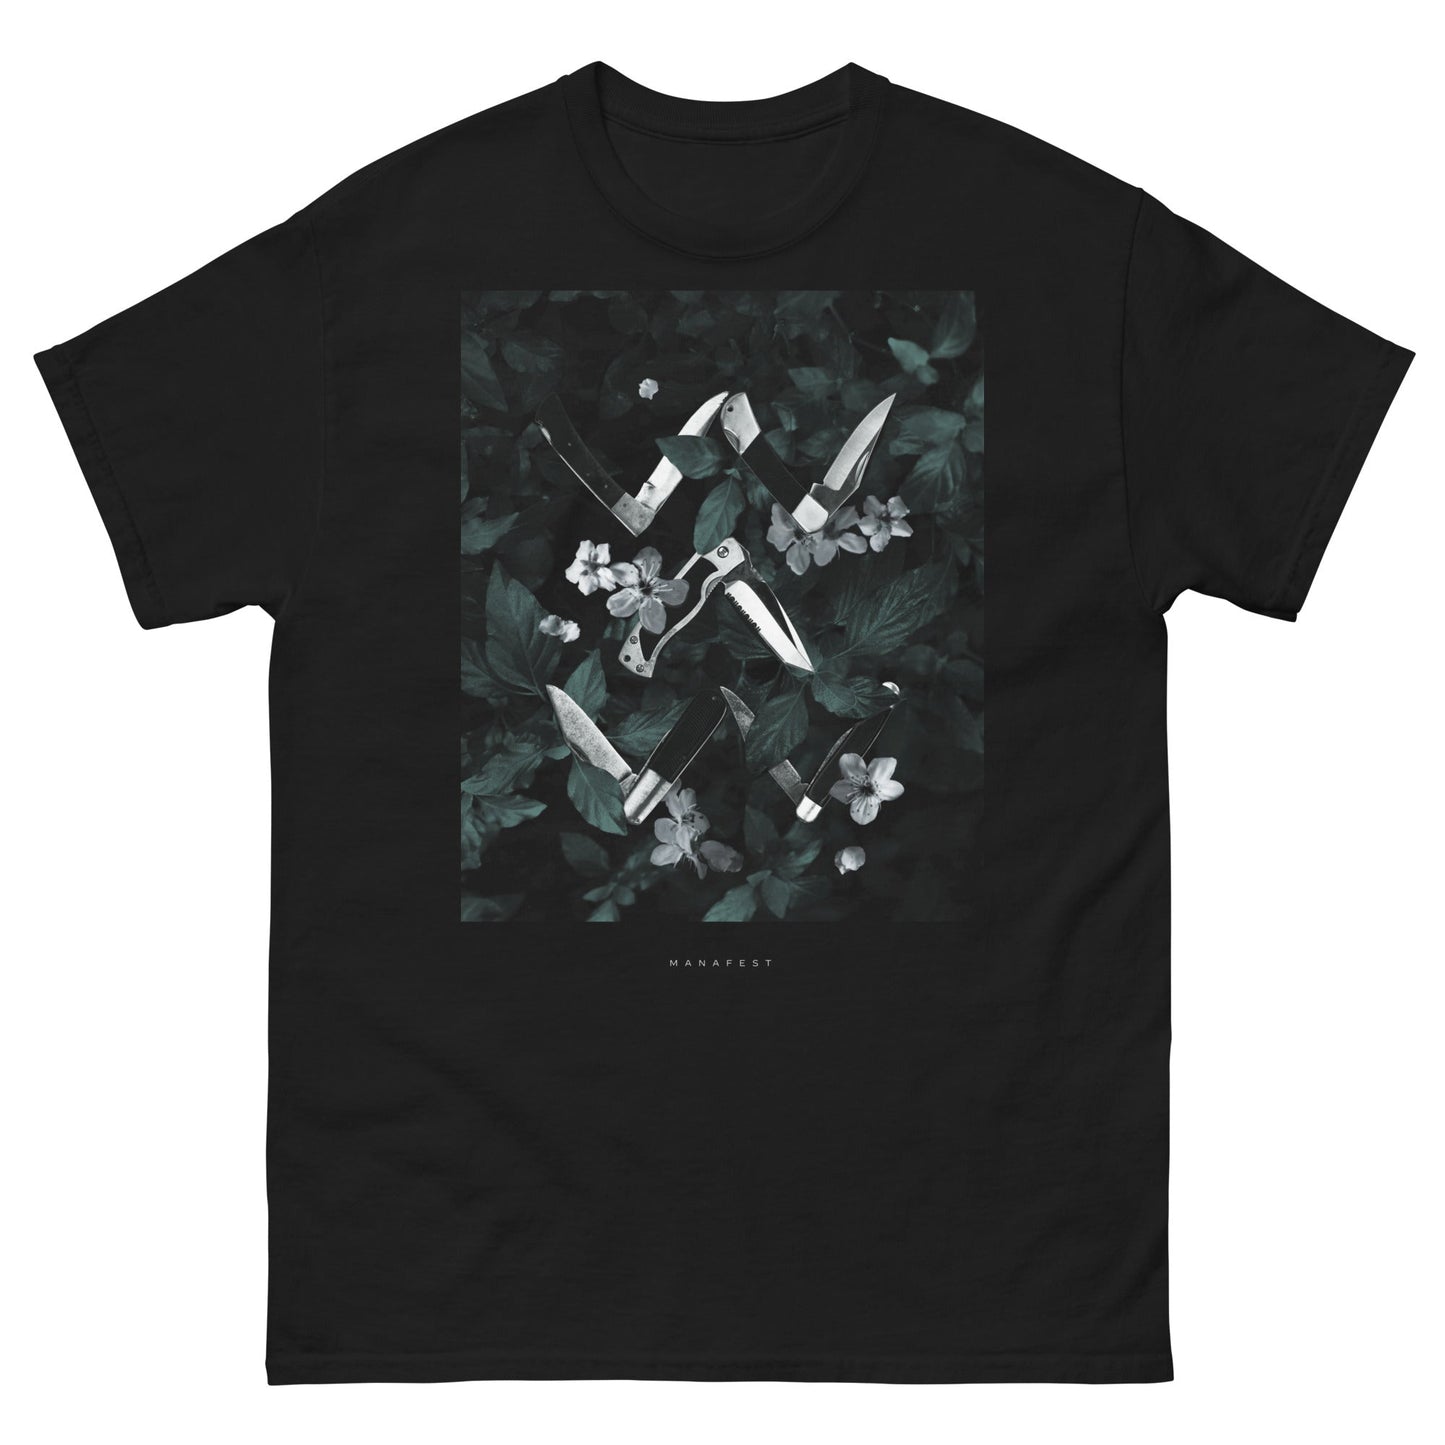 AutoGraphed Limited Edition Words Are Weapons Cover T-Shirt